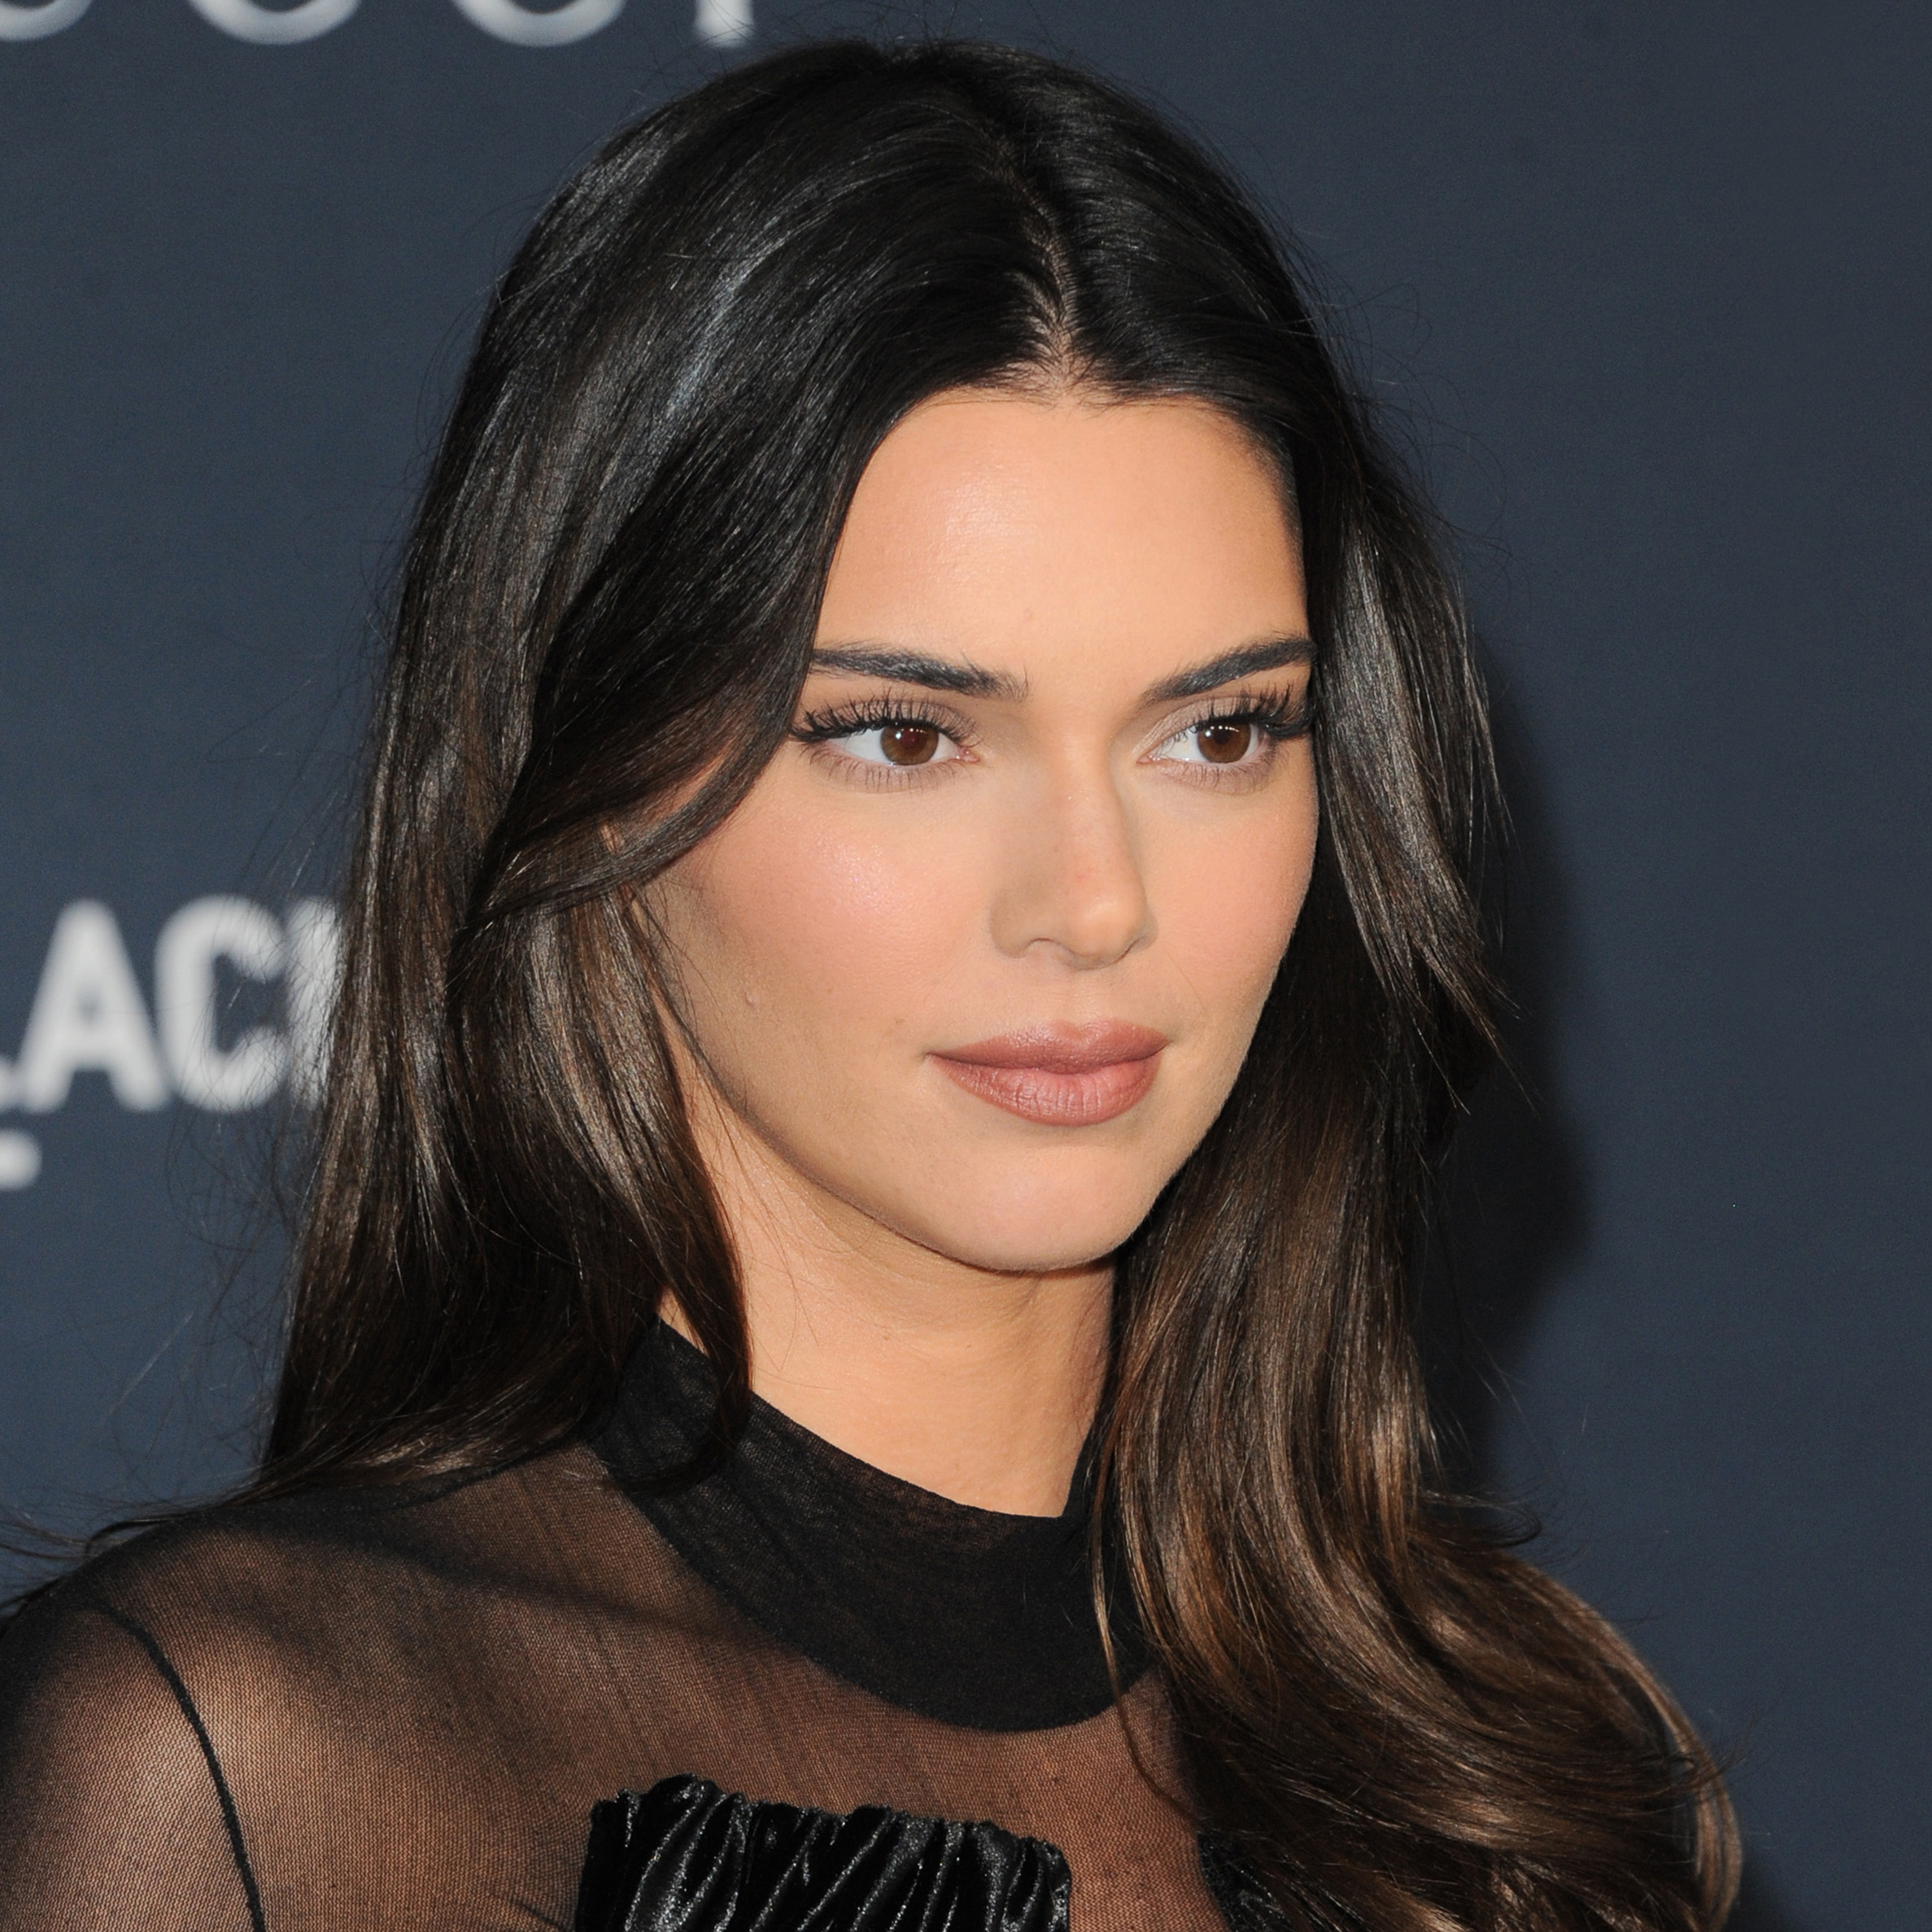 Kendall Jenner Wears Two Looks in One Day During Paris Fashion Week